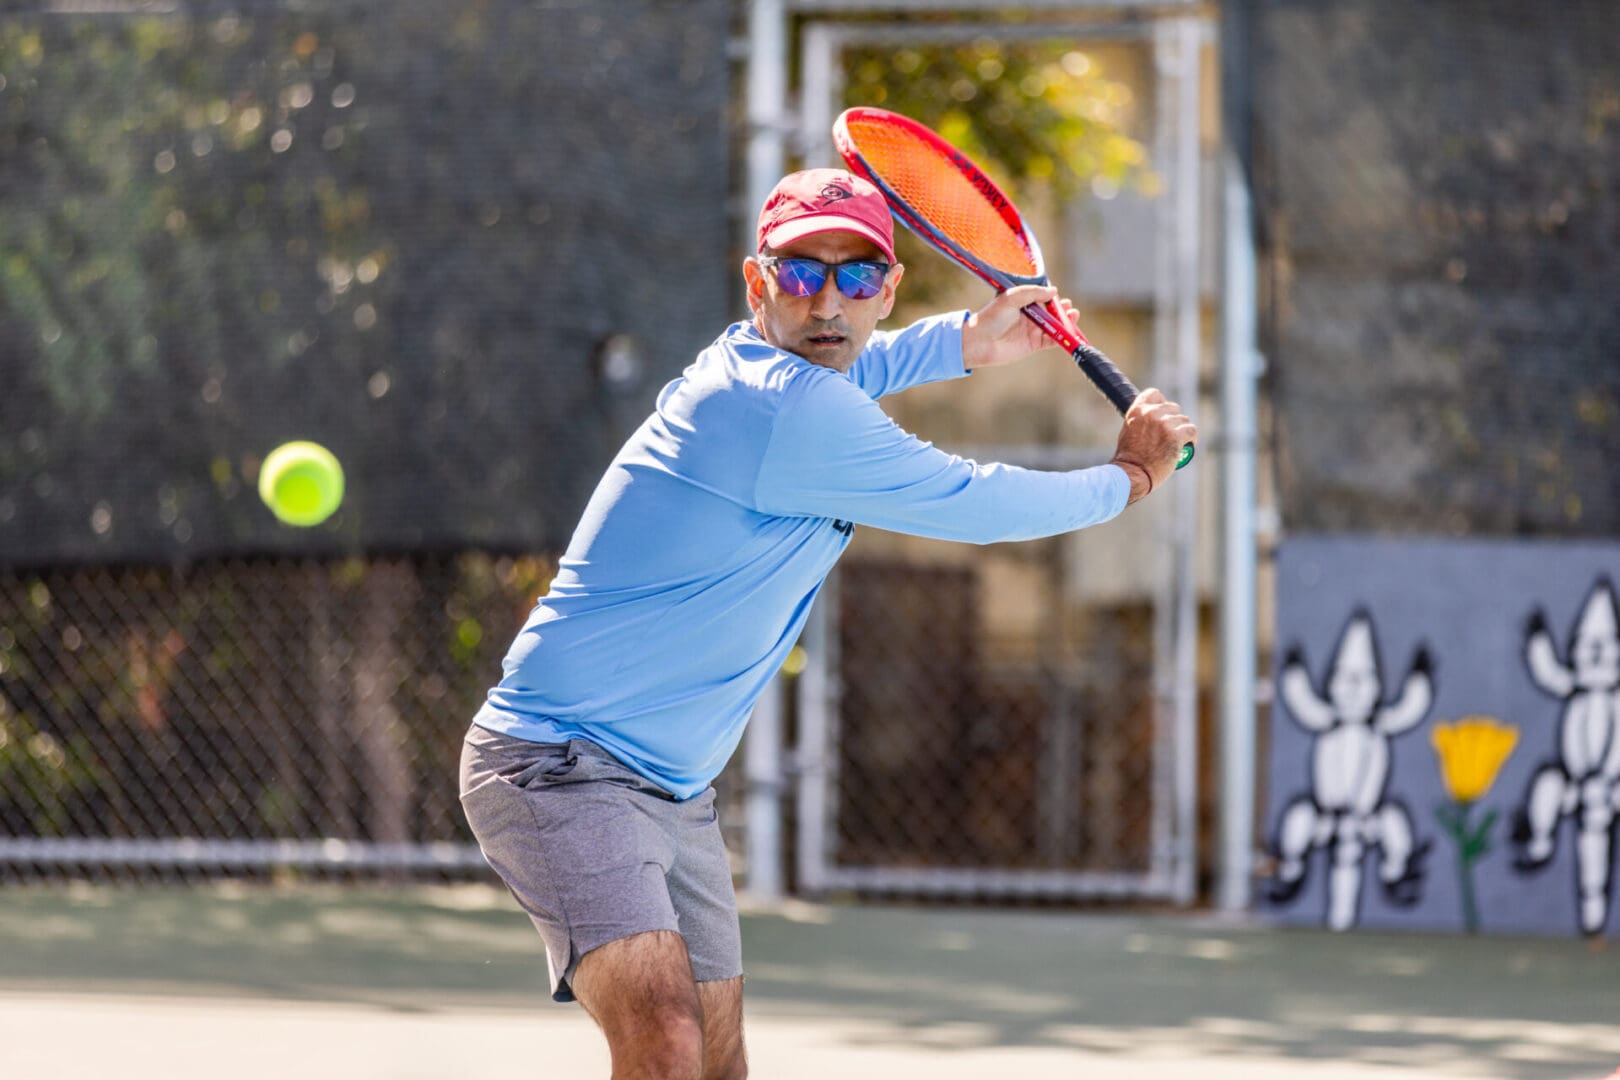 A man swinging at a tennis ball with his racket.